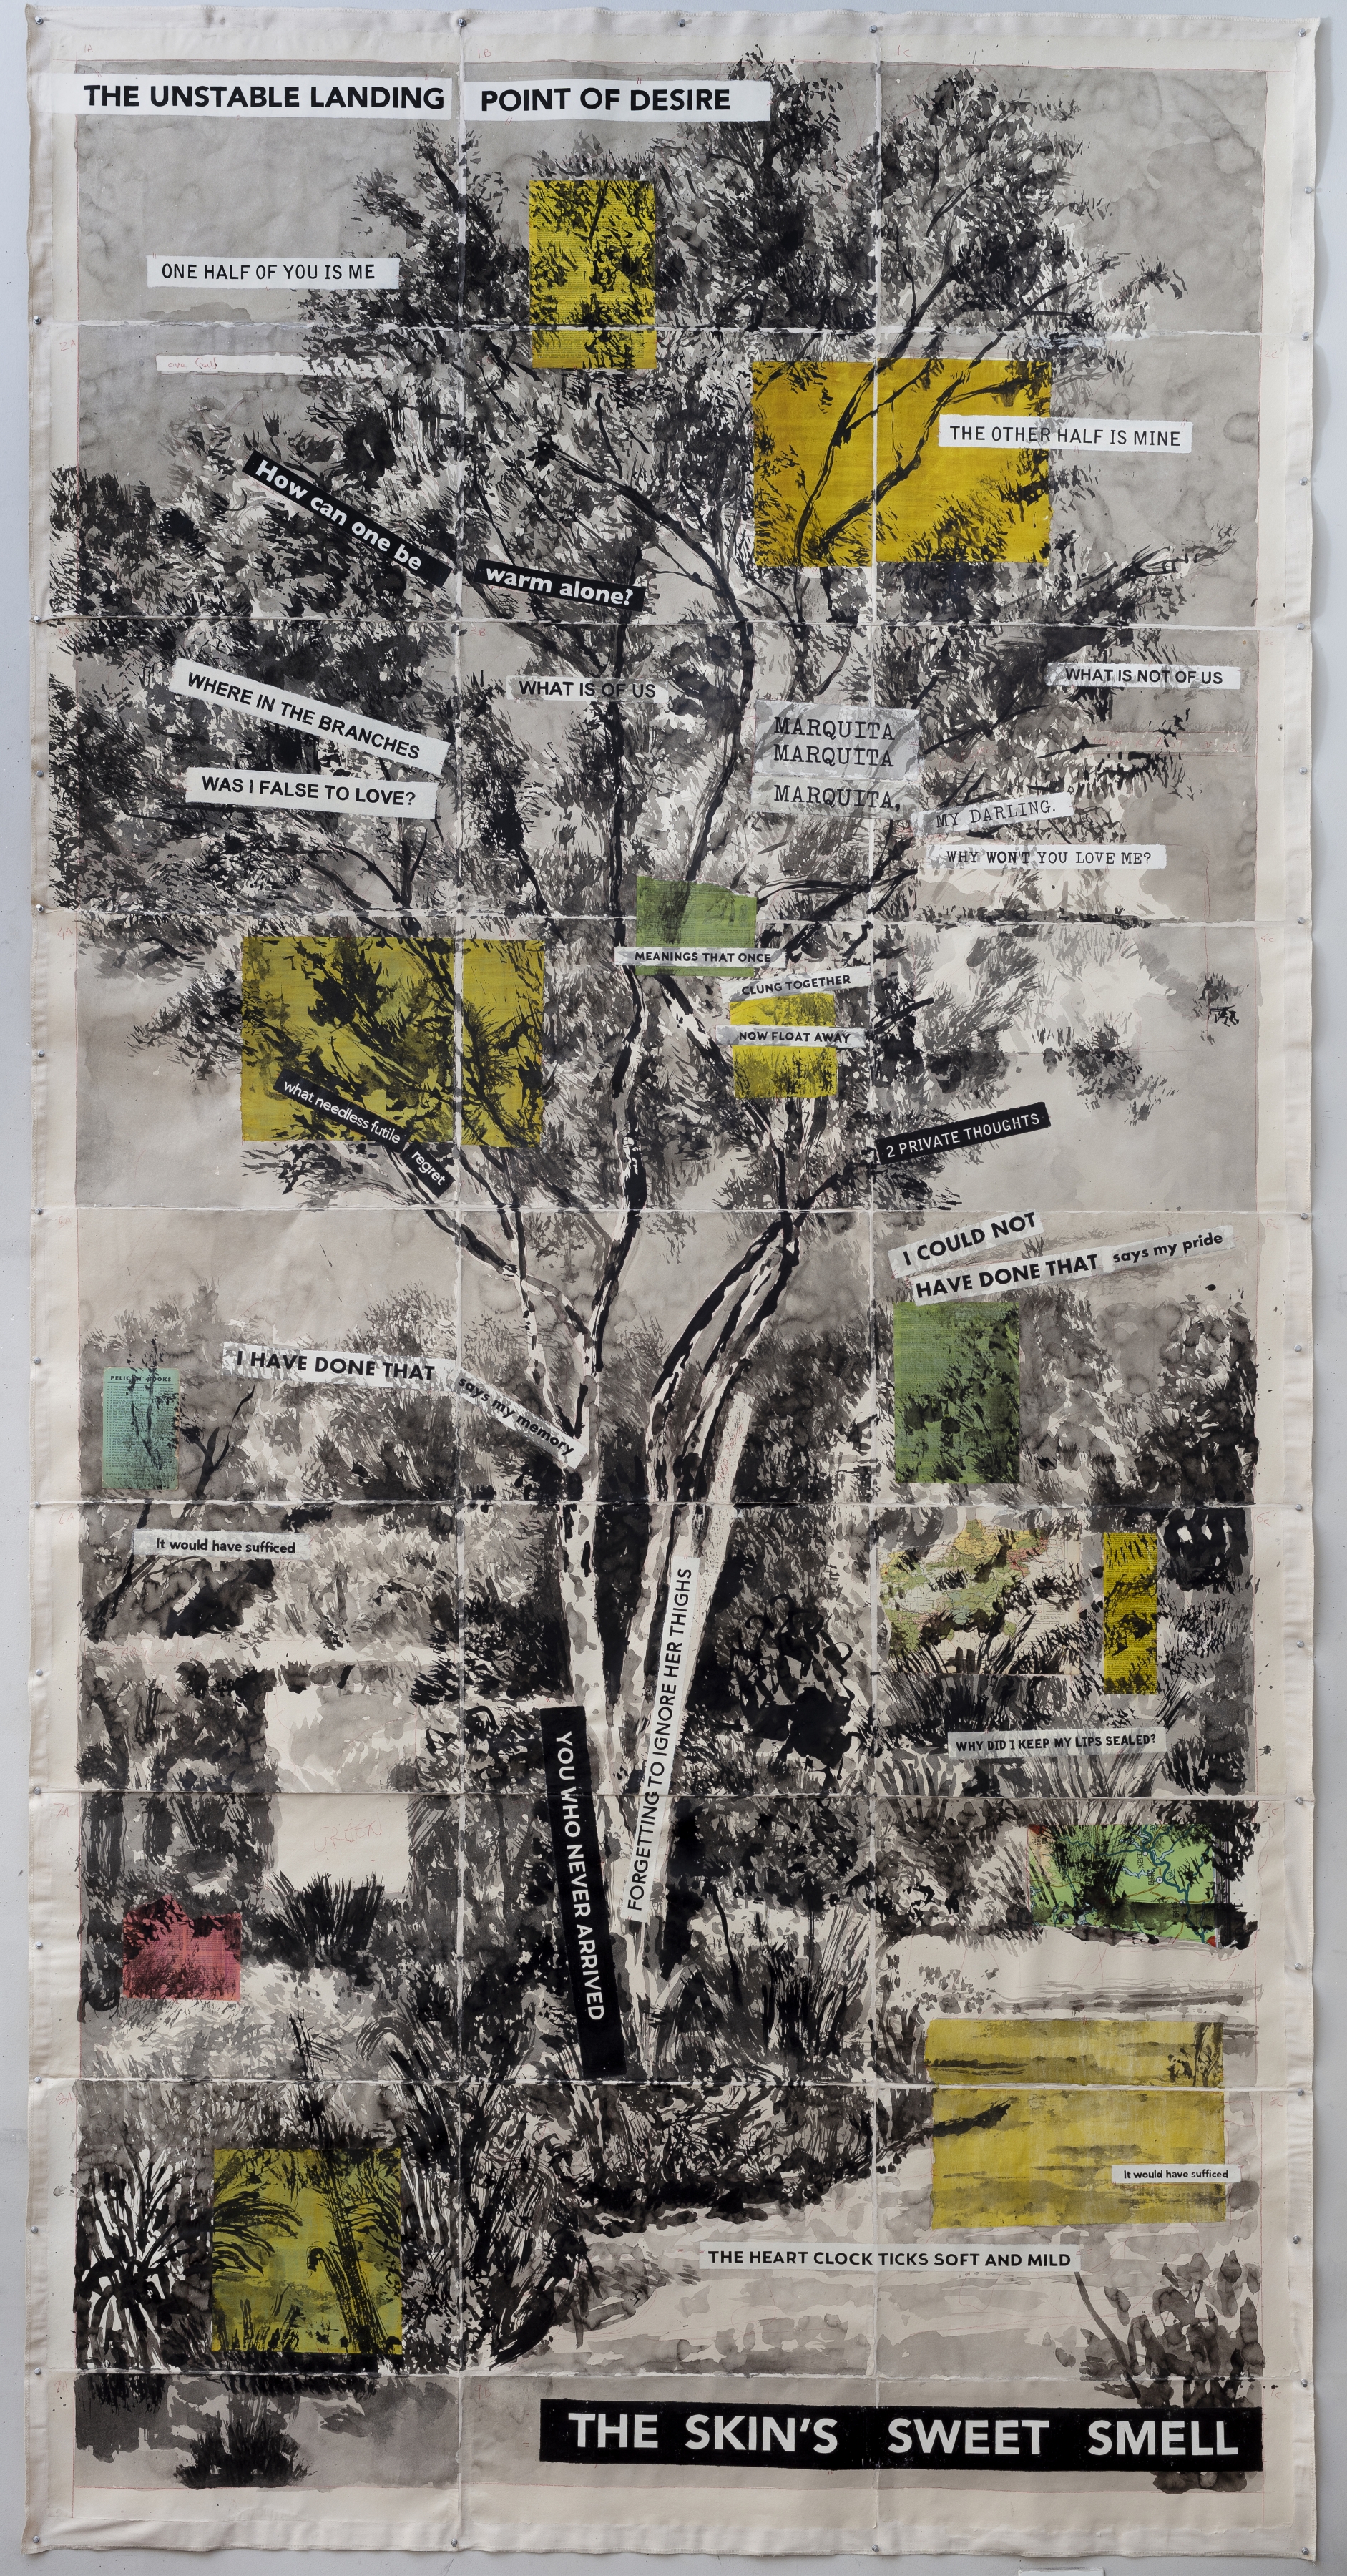 William Kentridge

The Unstable Landing Point of Desire, 2021

Indian ink, watercolour, pencil and collage on paper, mounted to canvas fabric

373 x 187 cm